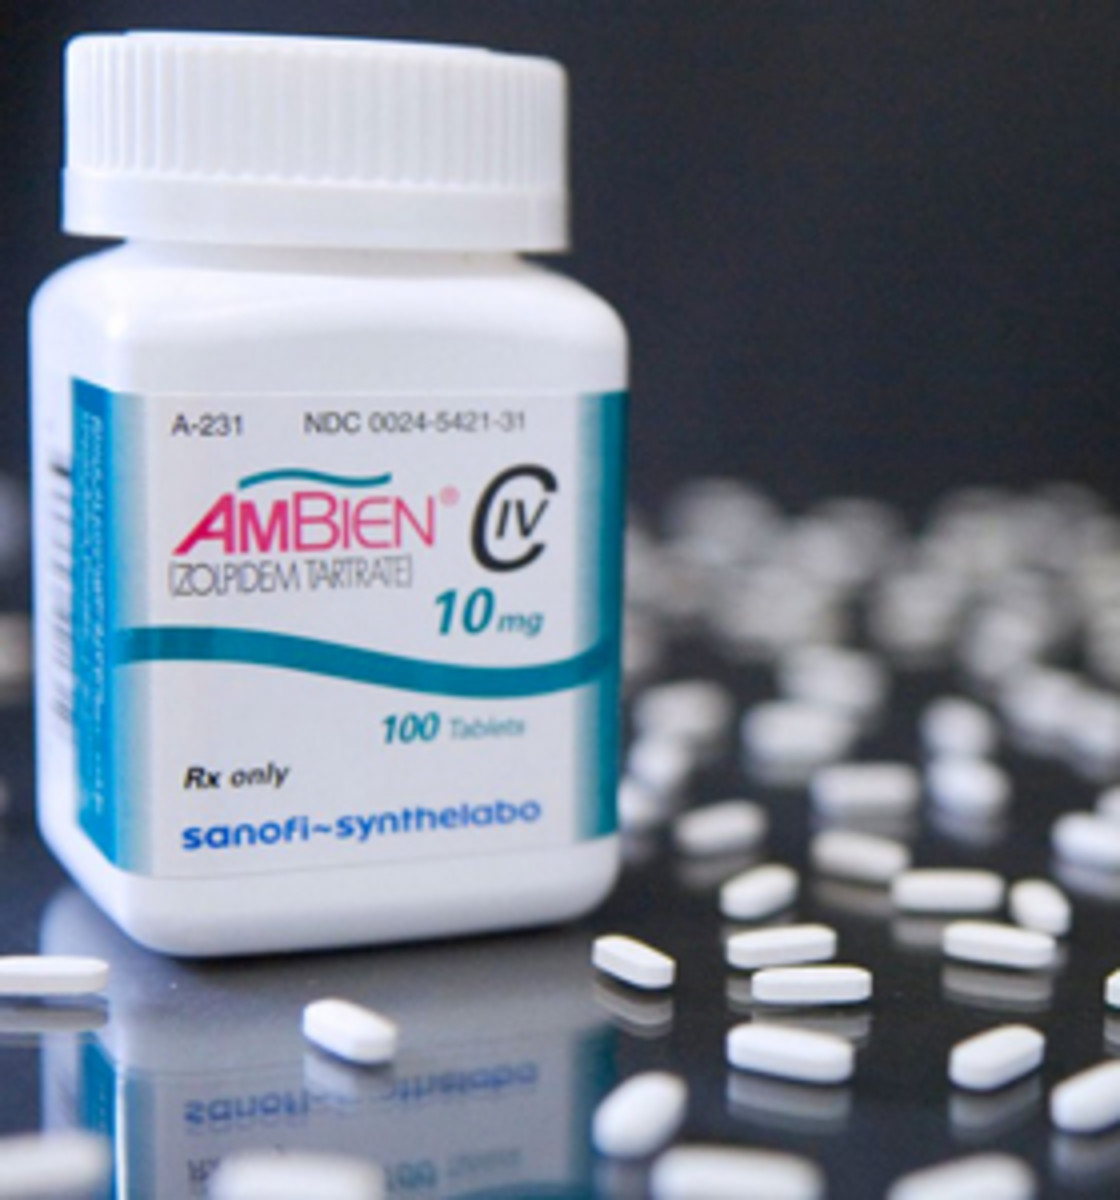 ambien-its-uses-dosage-and-side-effects